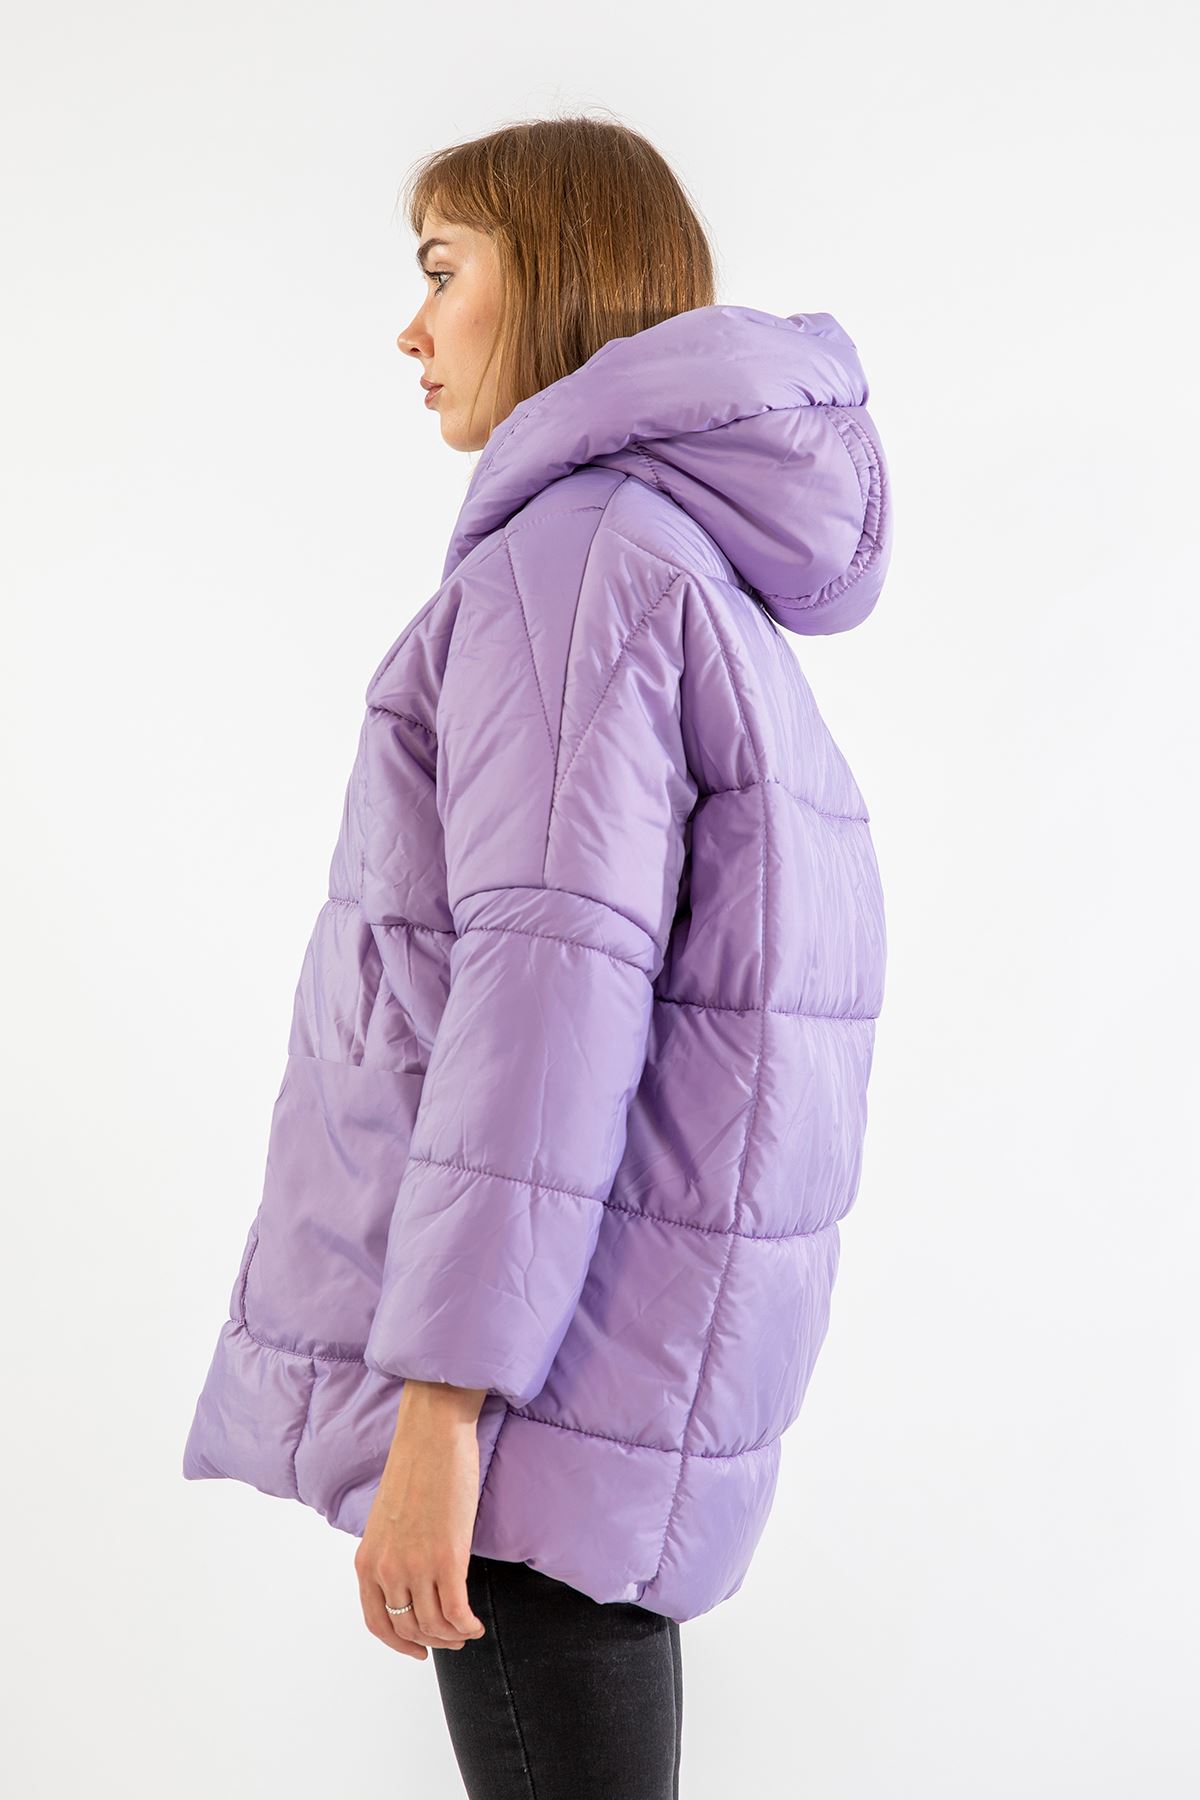 Quilted Fabric Long Sleeve Hooded Short Oversize Women Coat - Lilac